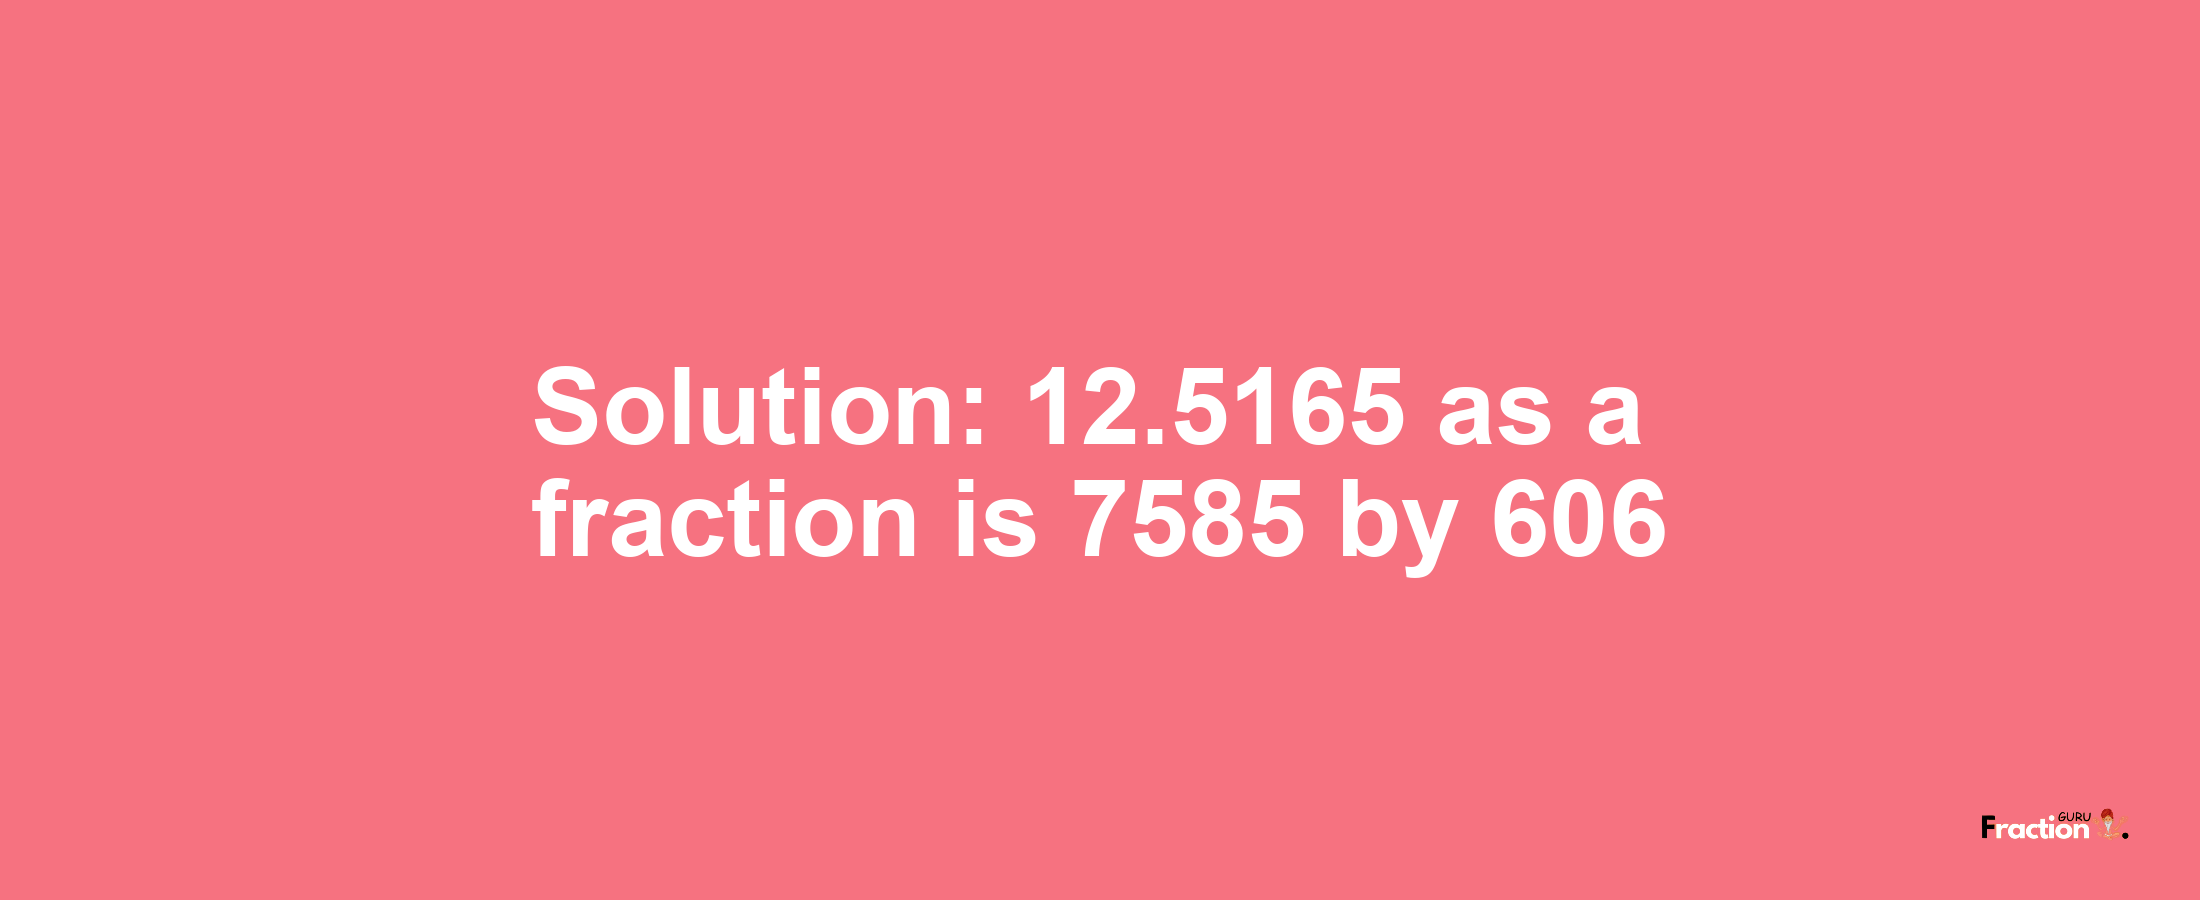 Solution:12.5165 as a fraction is 7585/606